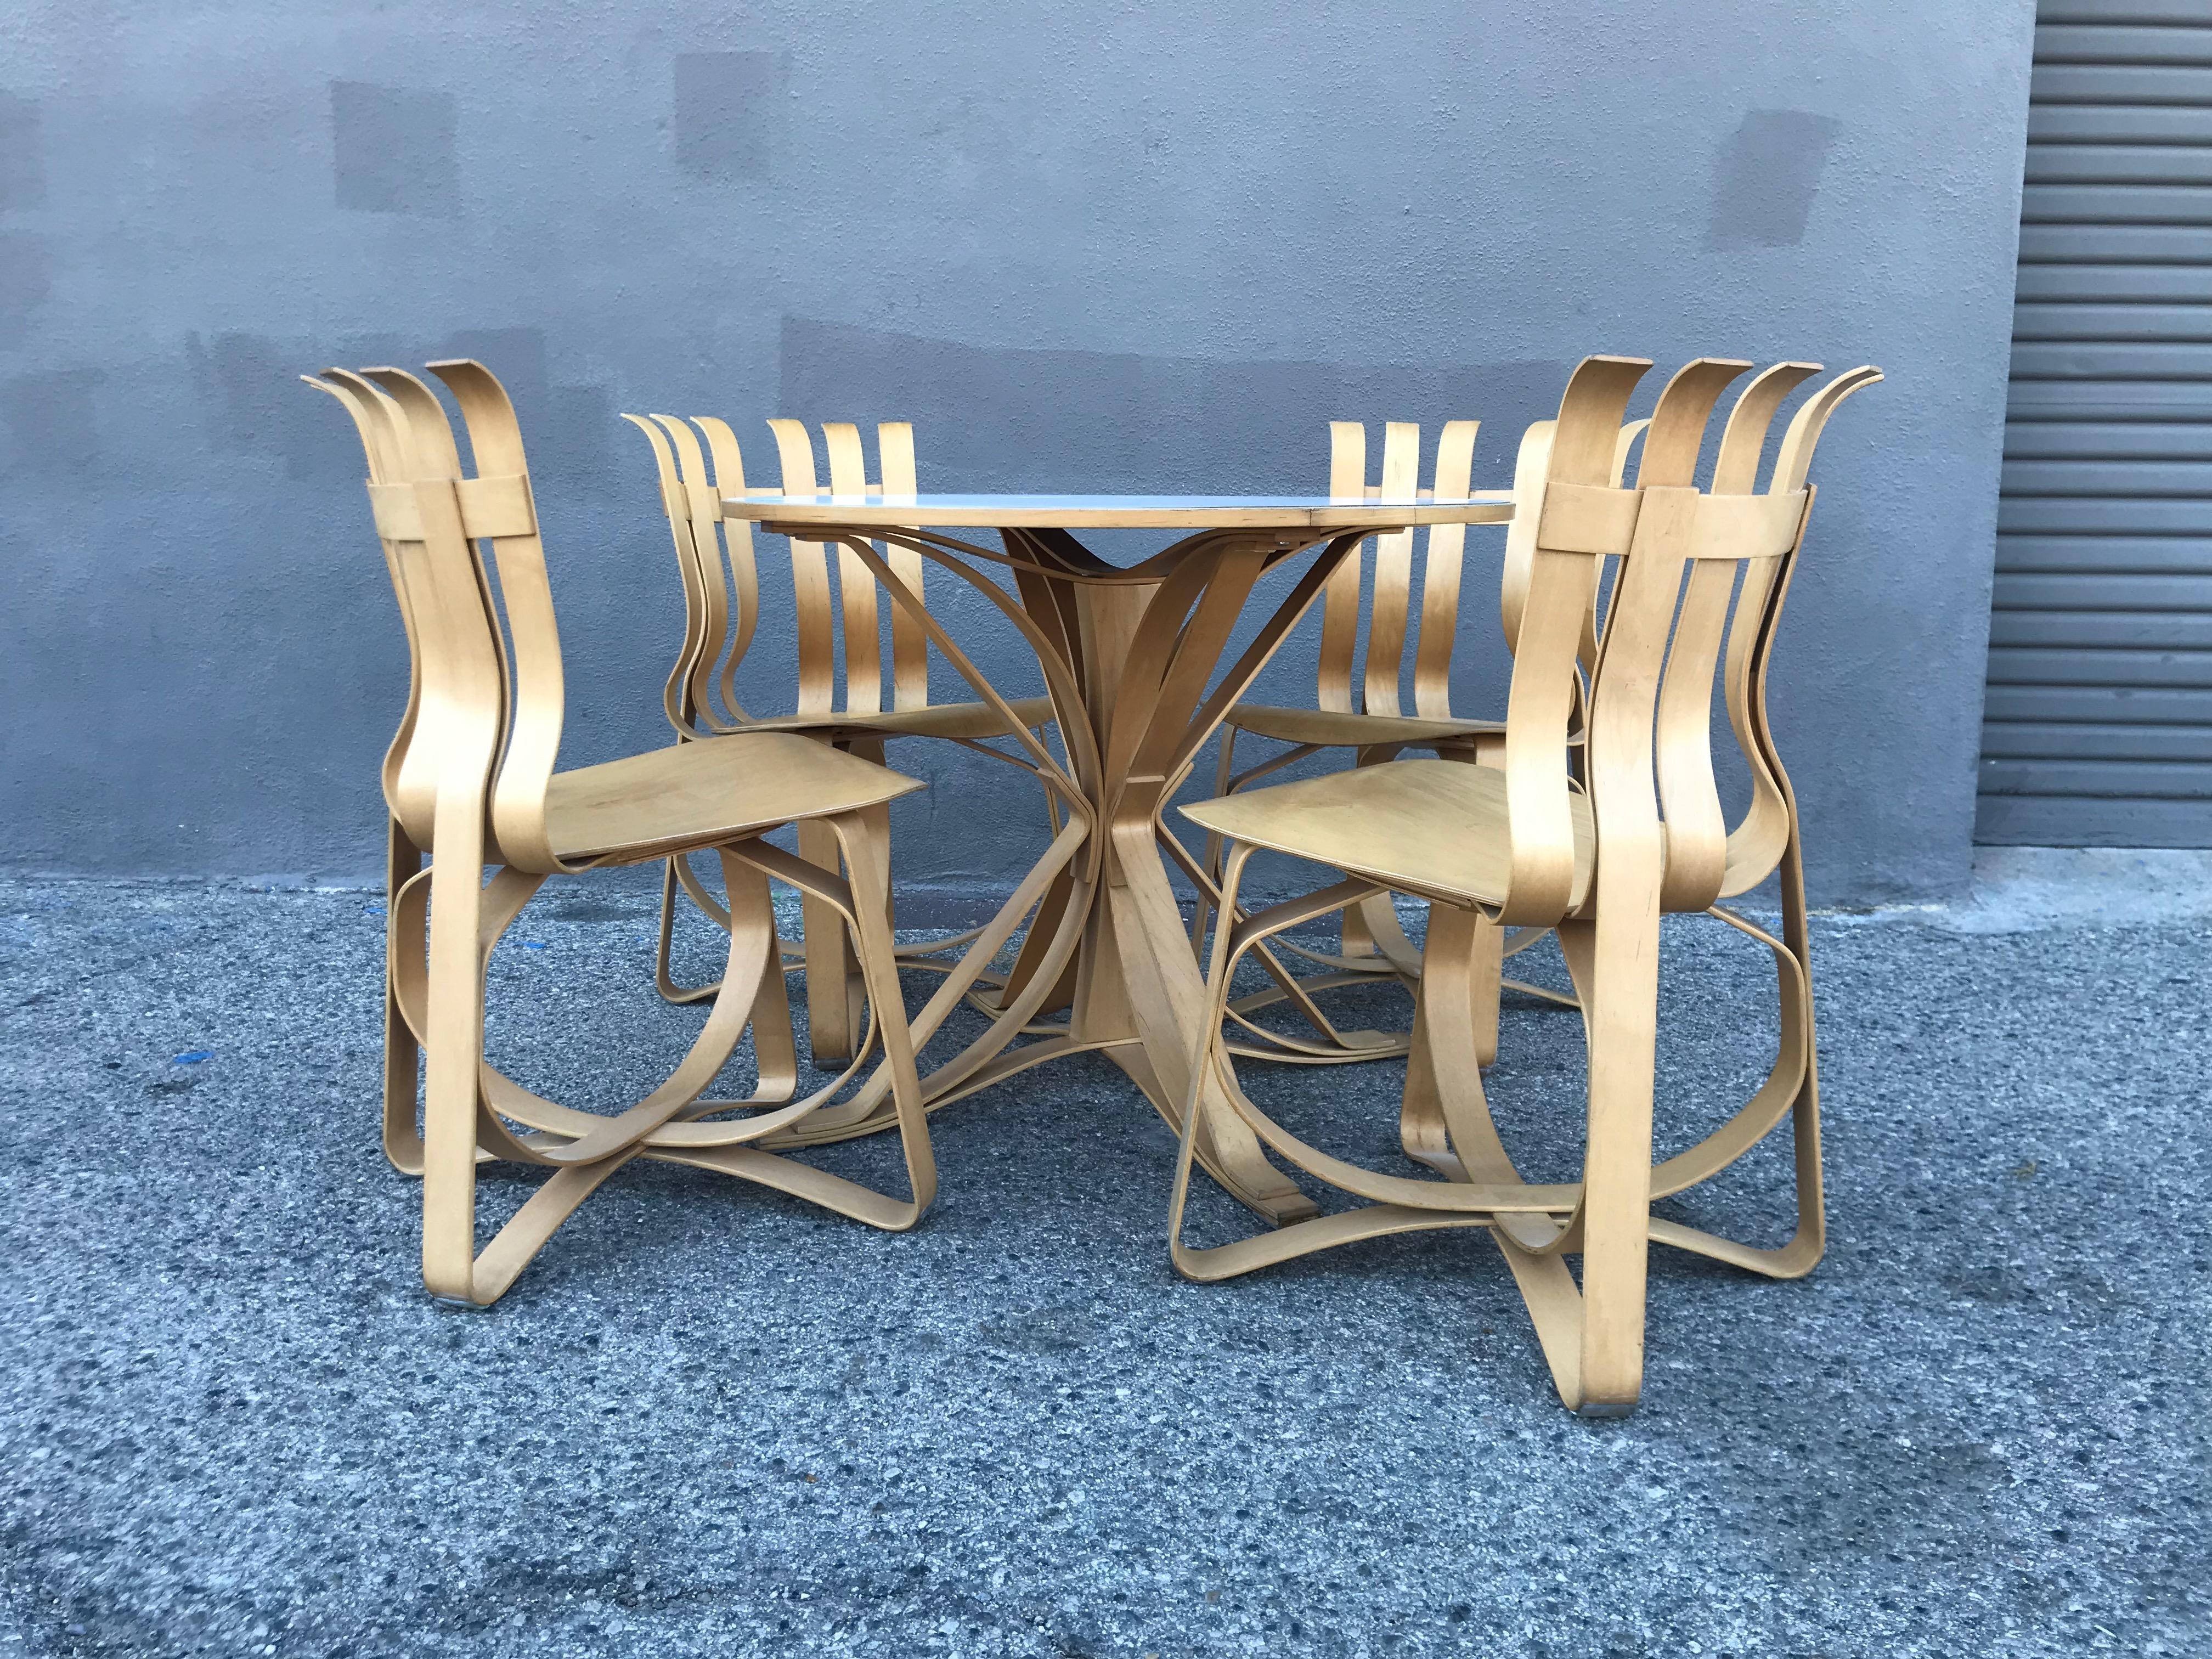 Nice bentwood design.
These are limited production pieces made to order.
Original condition showing minor wear with a nice patina consistent with age.
The table size is 29